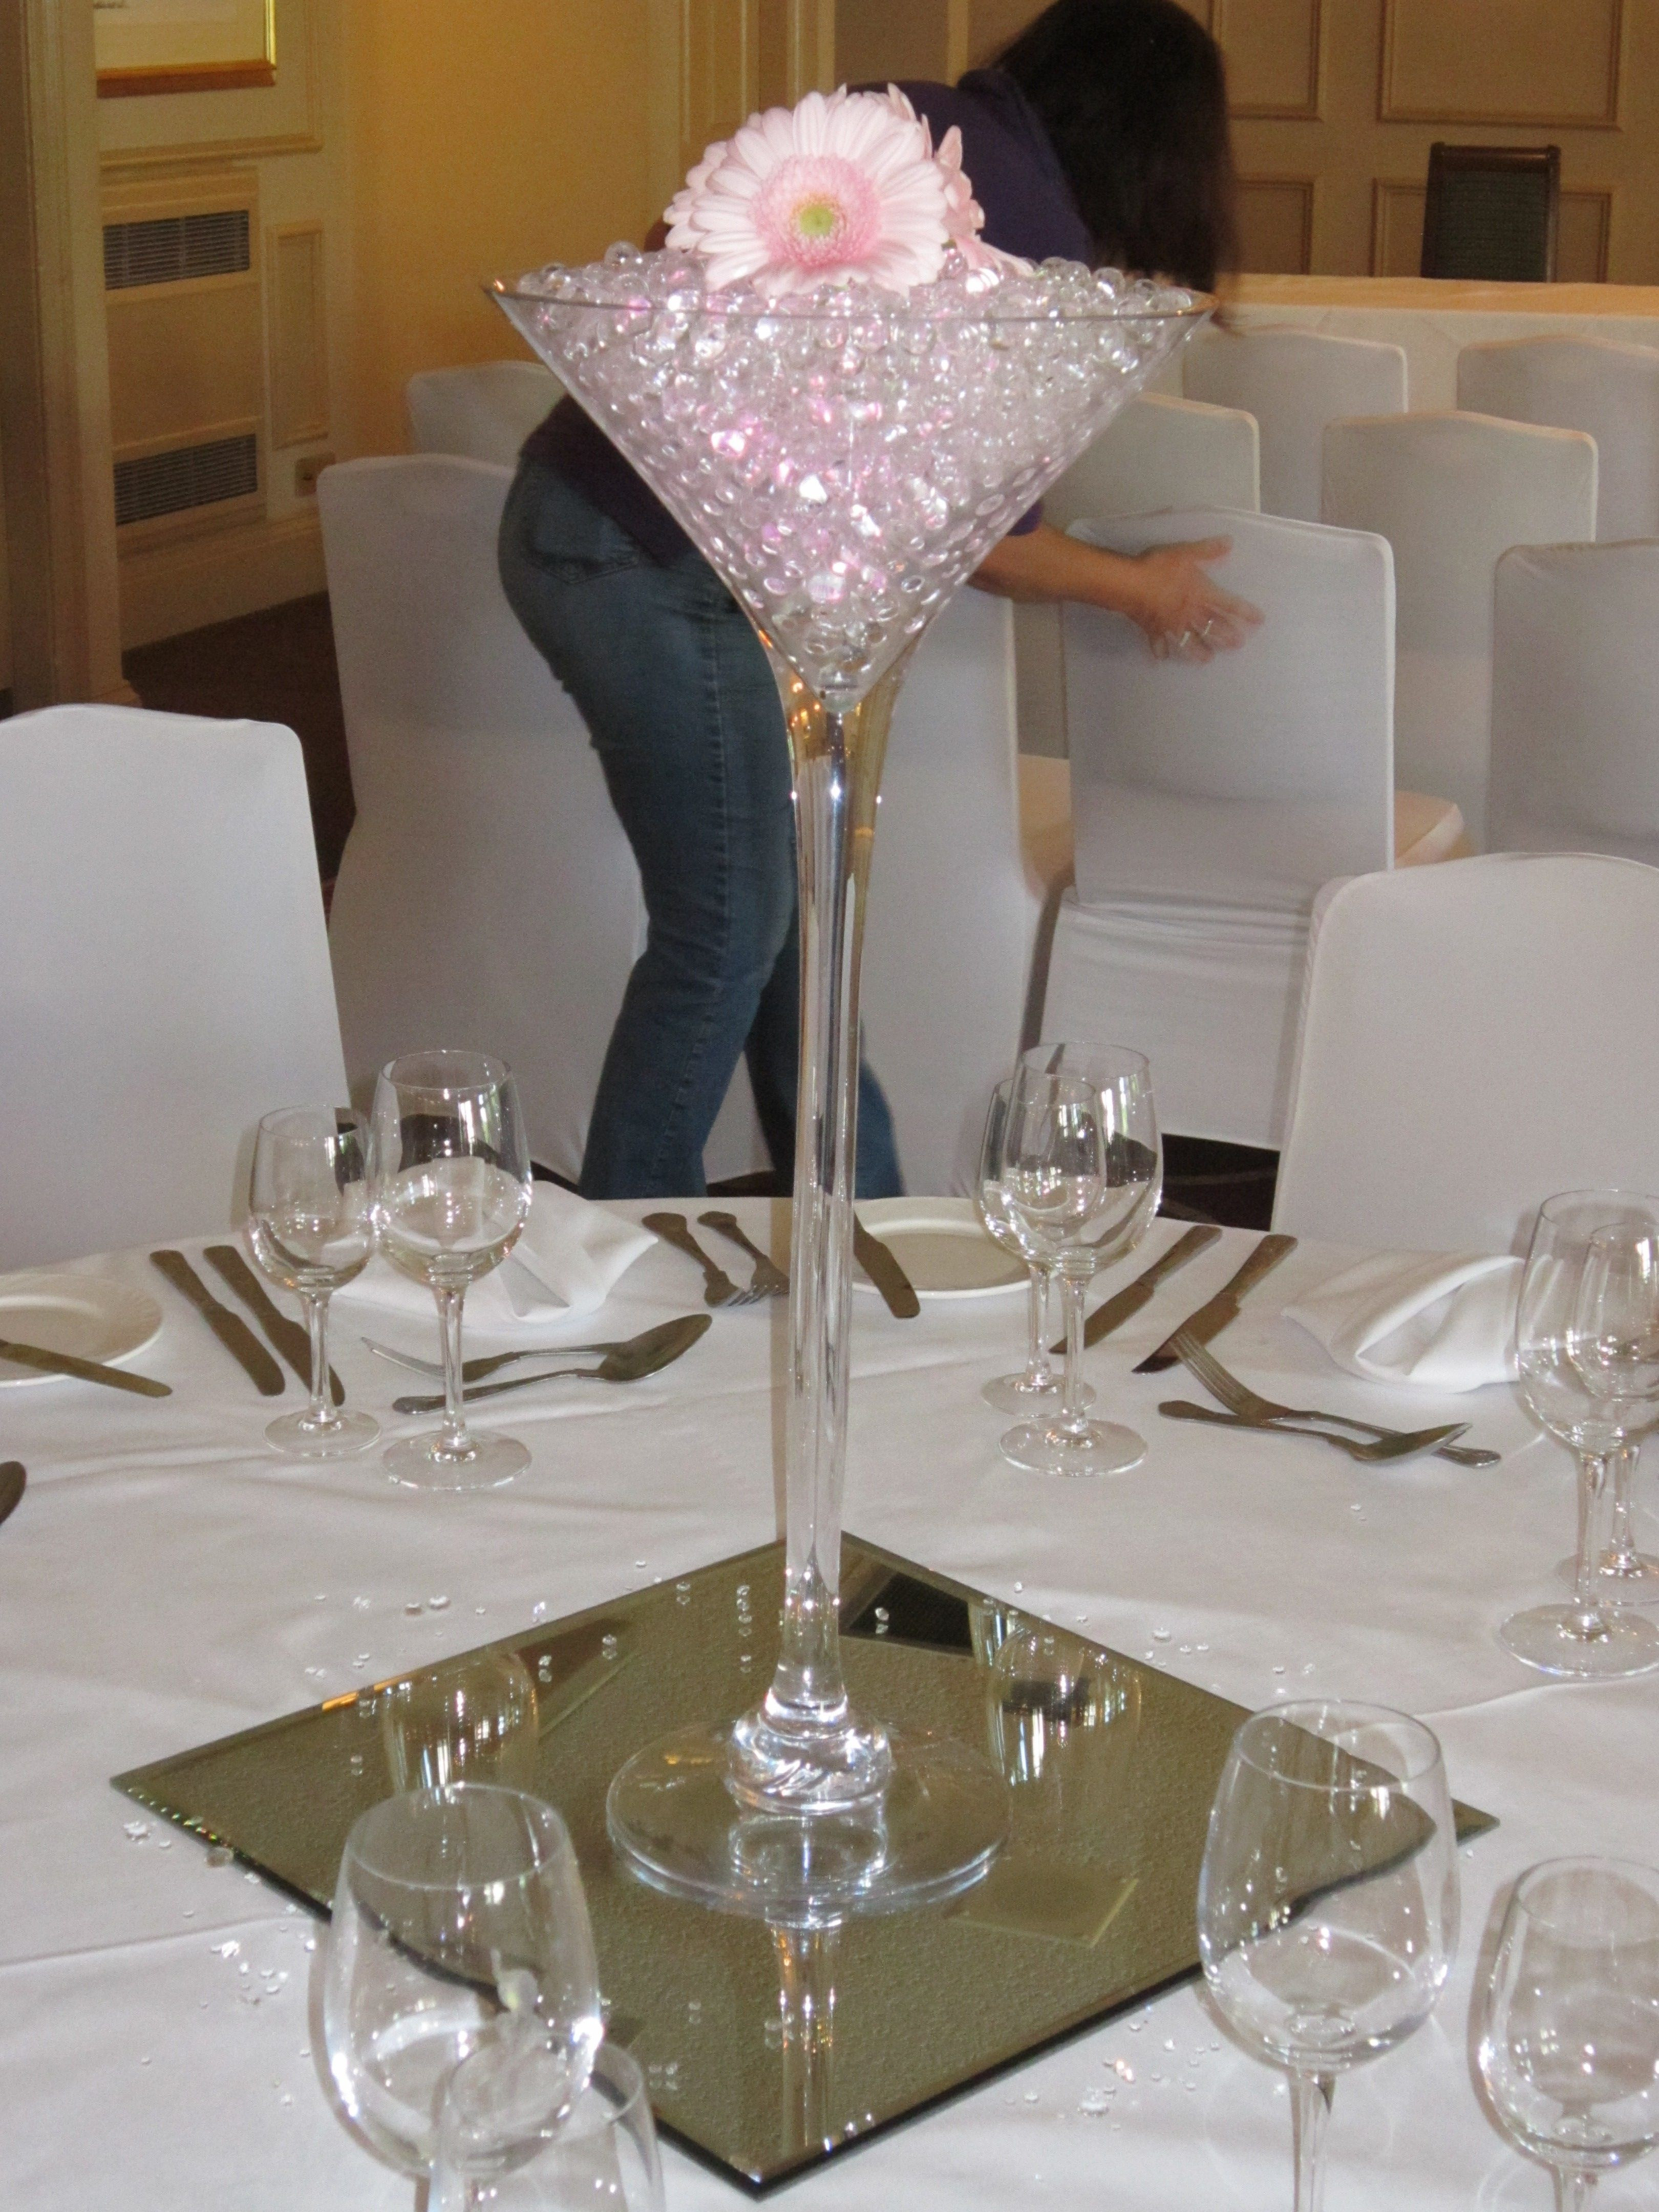 Bohemian Cut Glass Vase Of 23 Crystal Beaded Vase the Weekly World In Tall Martini Vase Of Gerberas and Lit Gel Beads